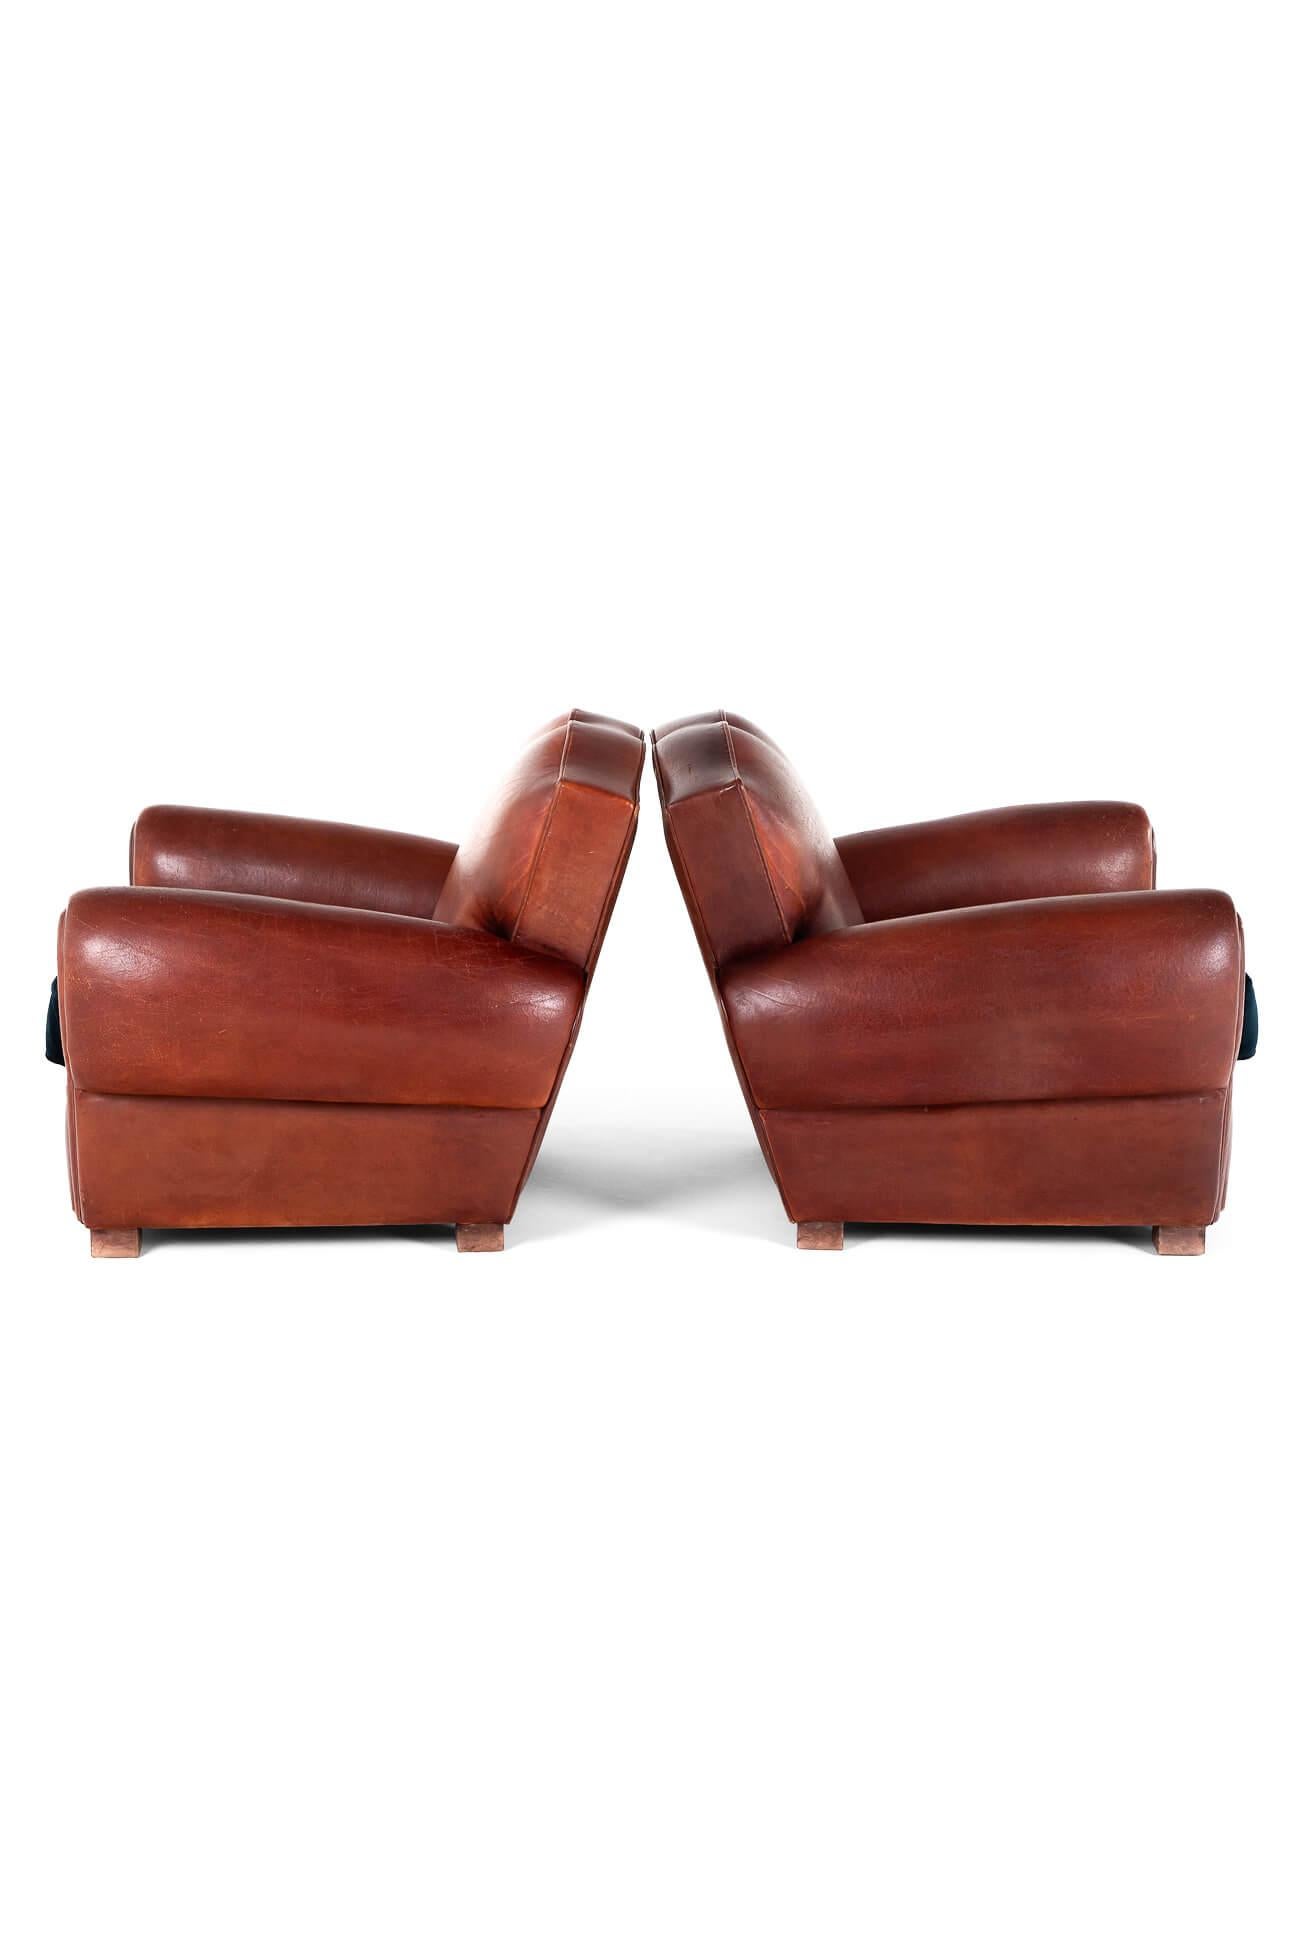 An exceptional pair of moustache back club chairs.

Generous cigar arms with deep seats over stuffed scroll backs.

Upholstered in a beautiful thick chestnut leather and raised on oak block feet.

Fully restored with new webbing and springs replaced